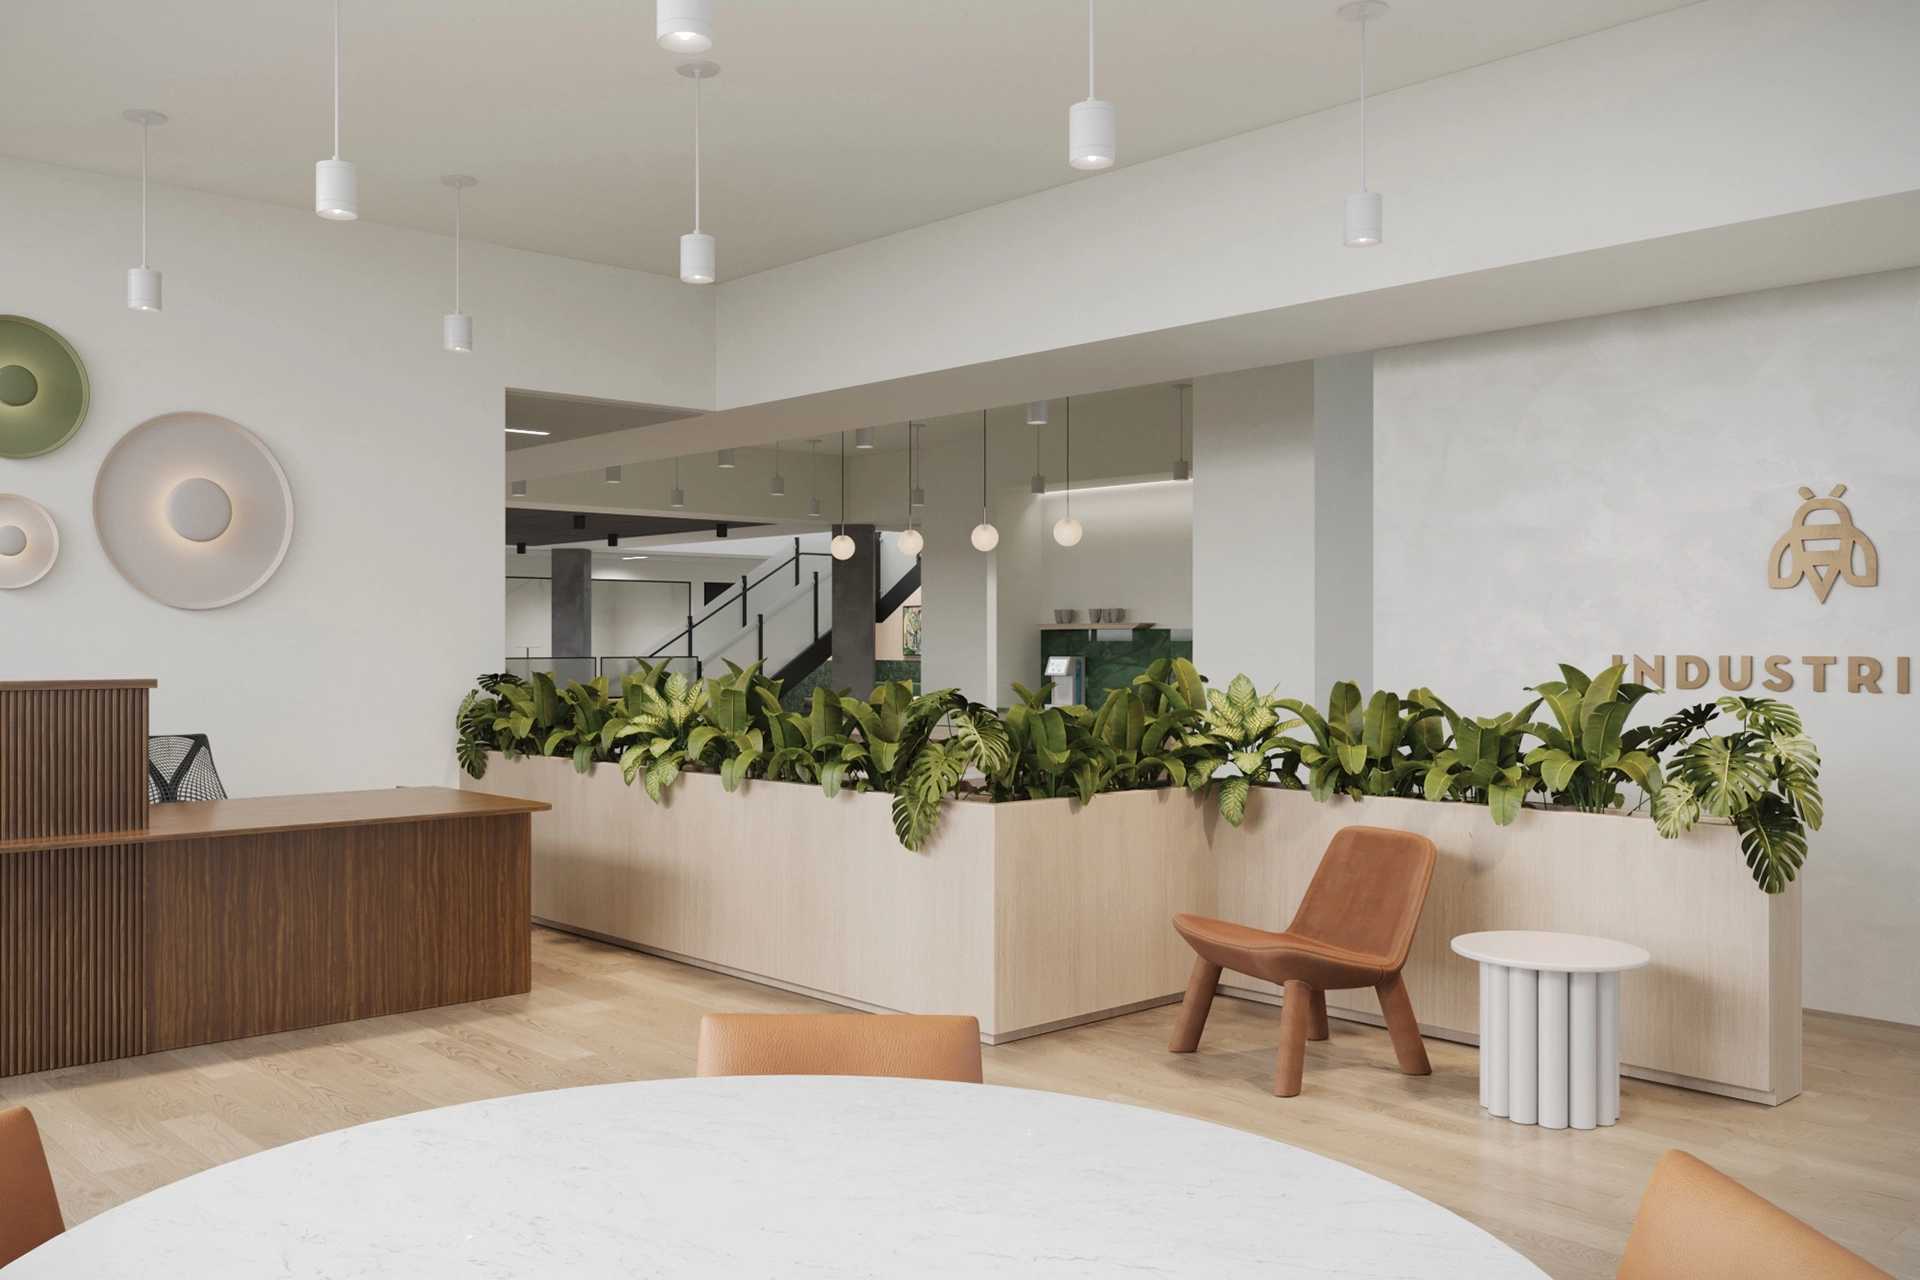 The coworking office in Miami welcomes guests with a reception area featuring a table and chairs.